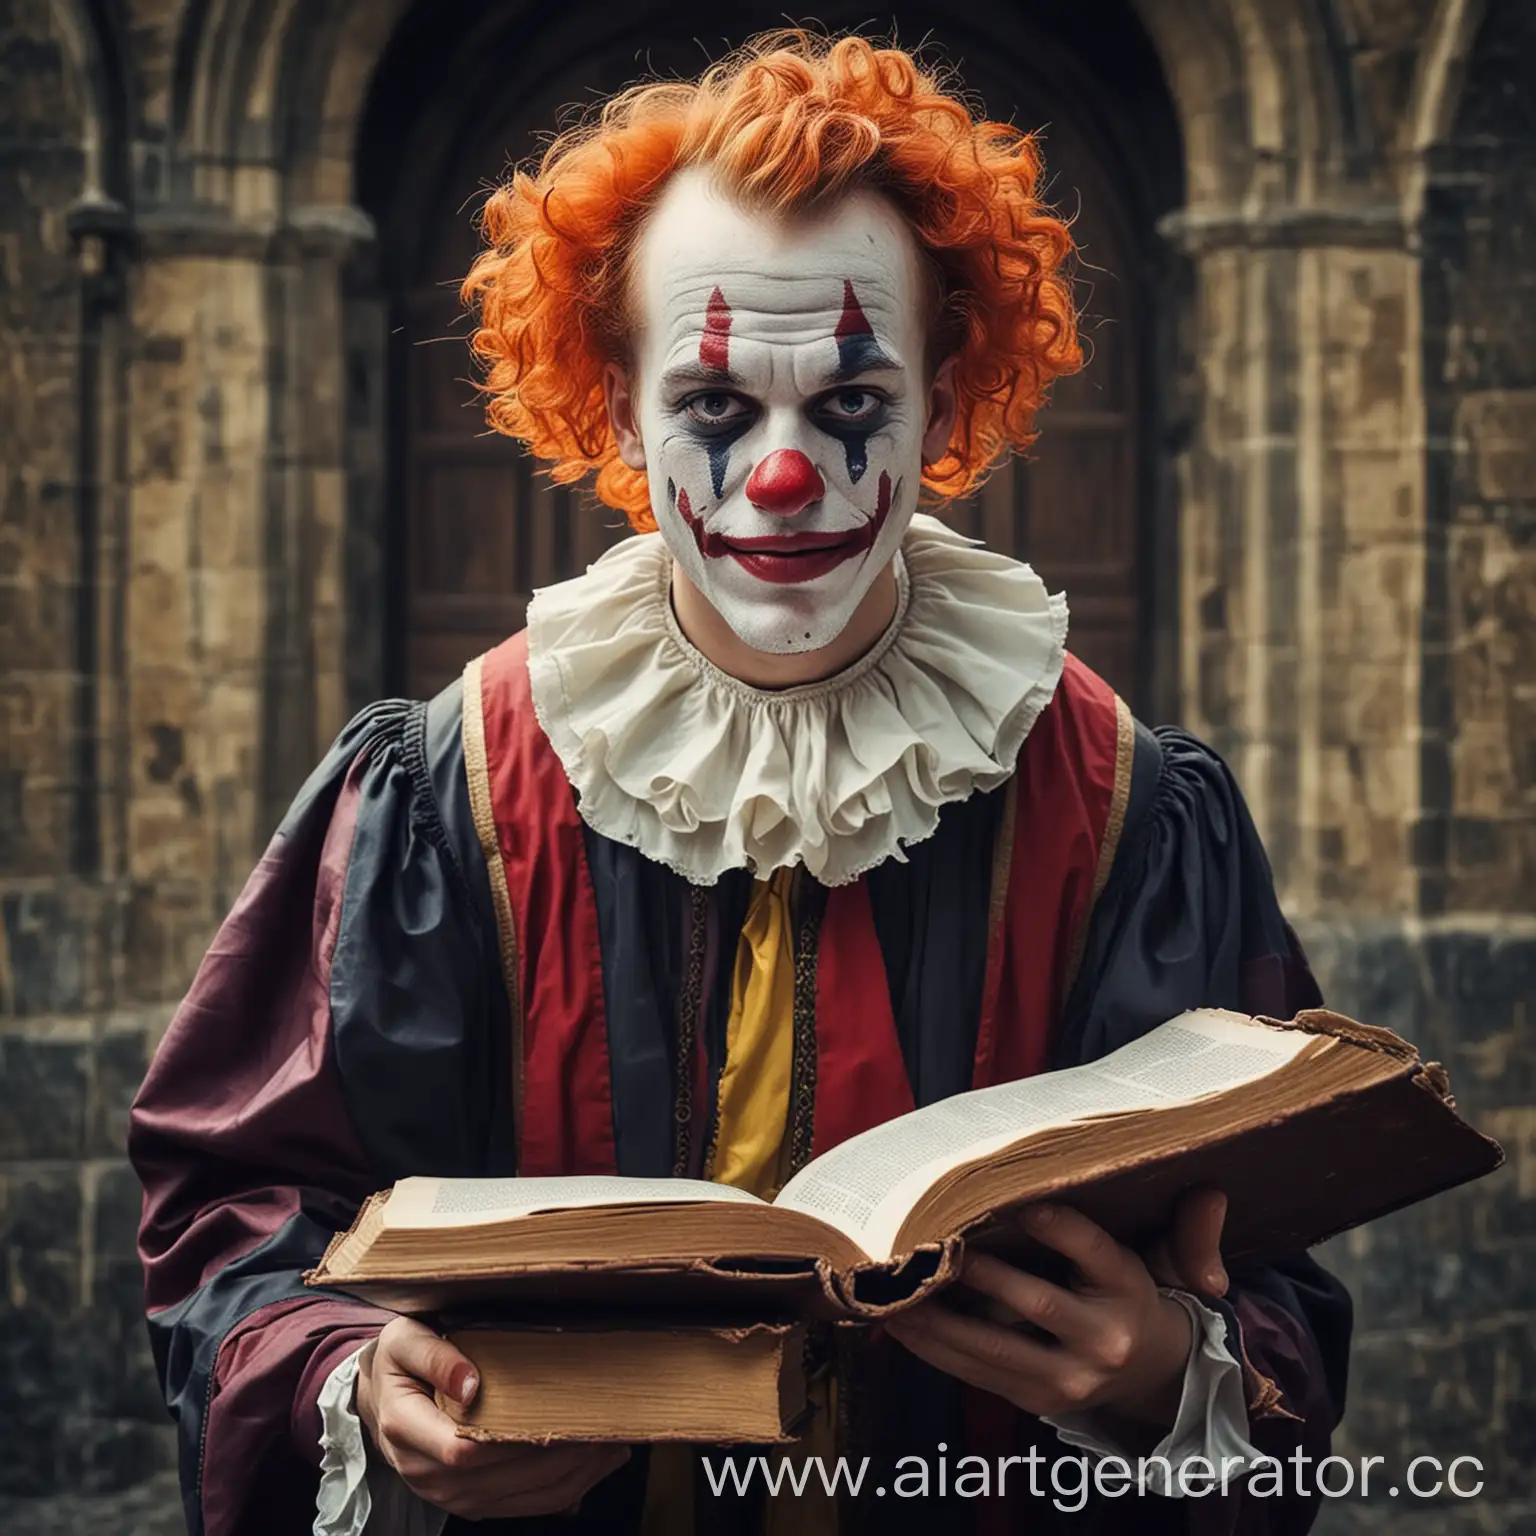 Medieval-Student-Lawyer-Defending-Against-Clown-with-Book